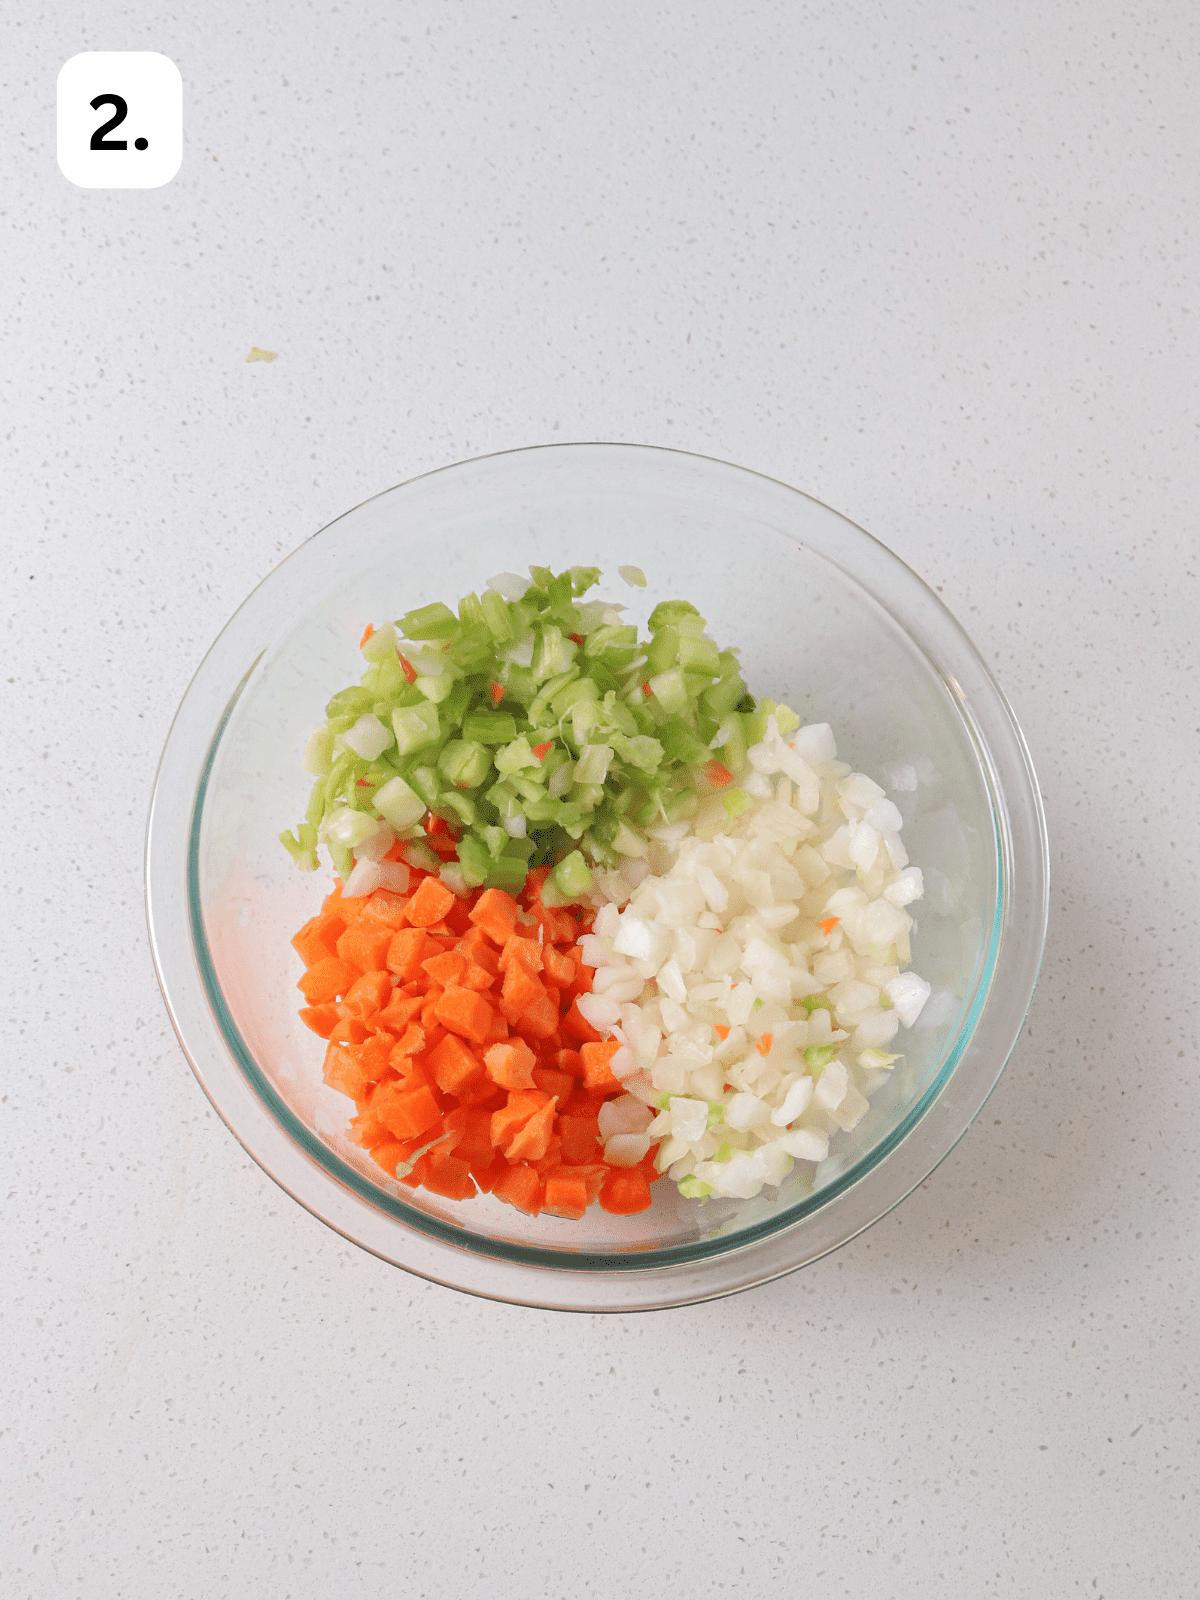 Chopped Celery and Carrots